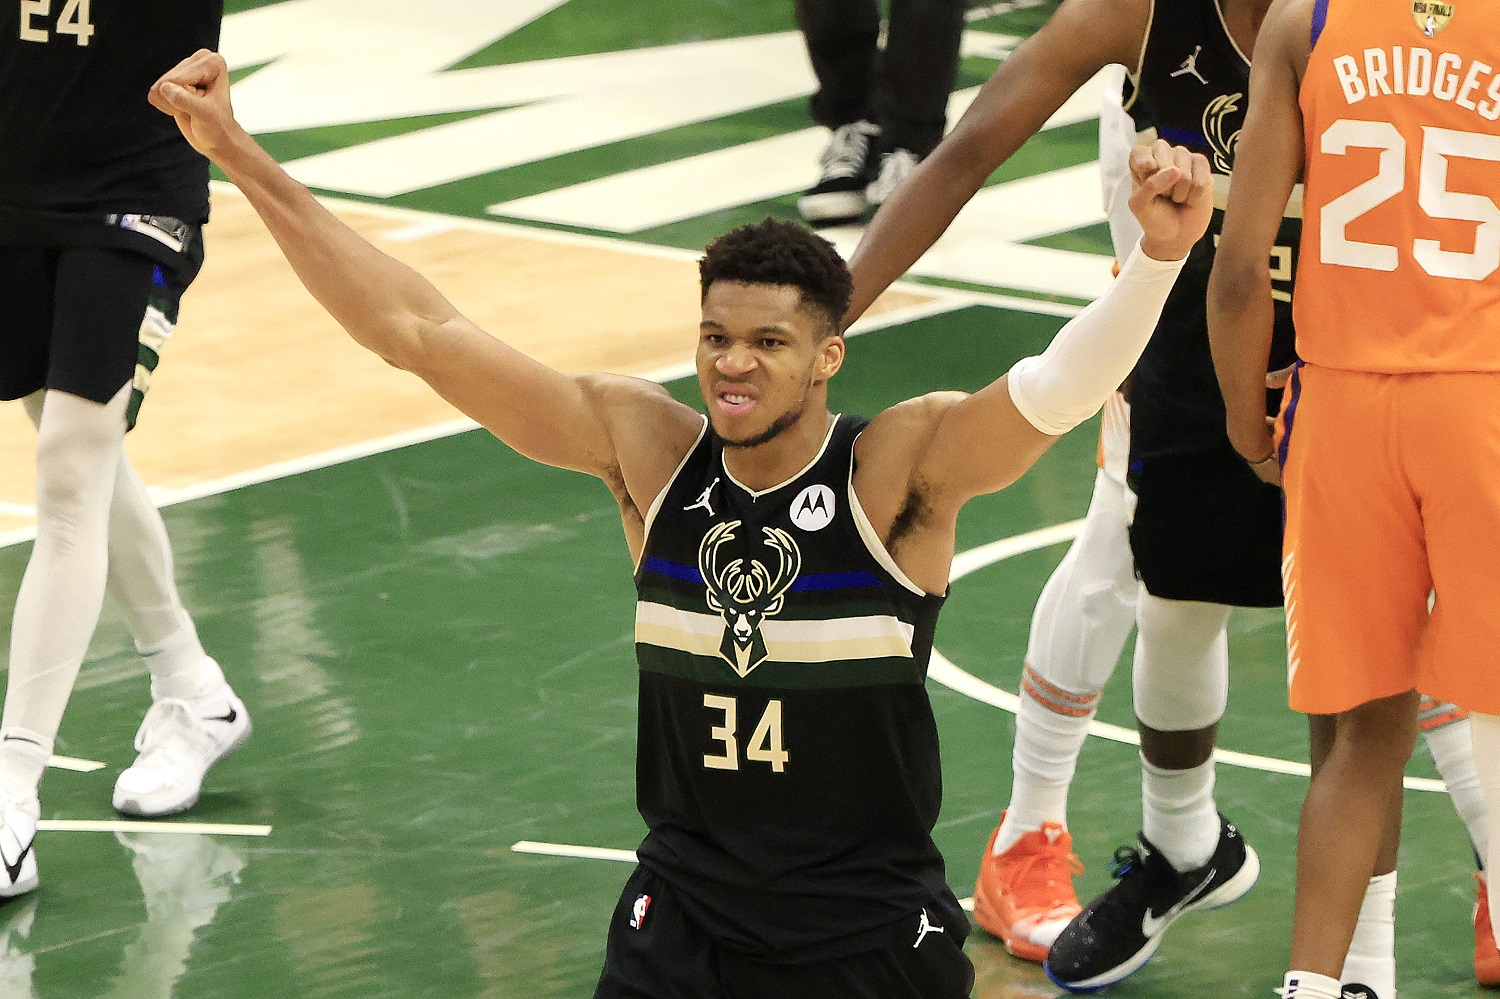 Giannis Antetokounmpo of the Milwaukee Bucks celebrates in the final seconds before defeating the Phoenix Suns in Game 6 to win the 2021 NBA championship at Fiserv Forum.